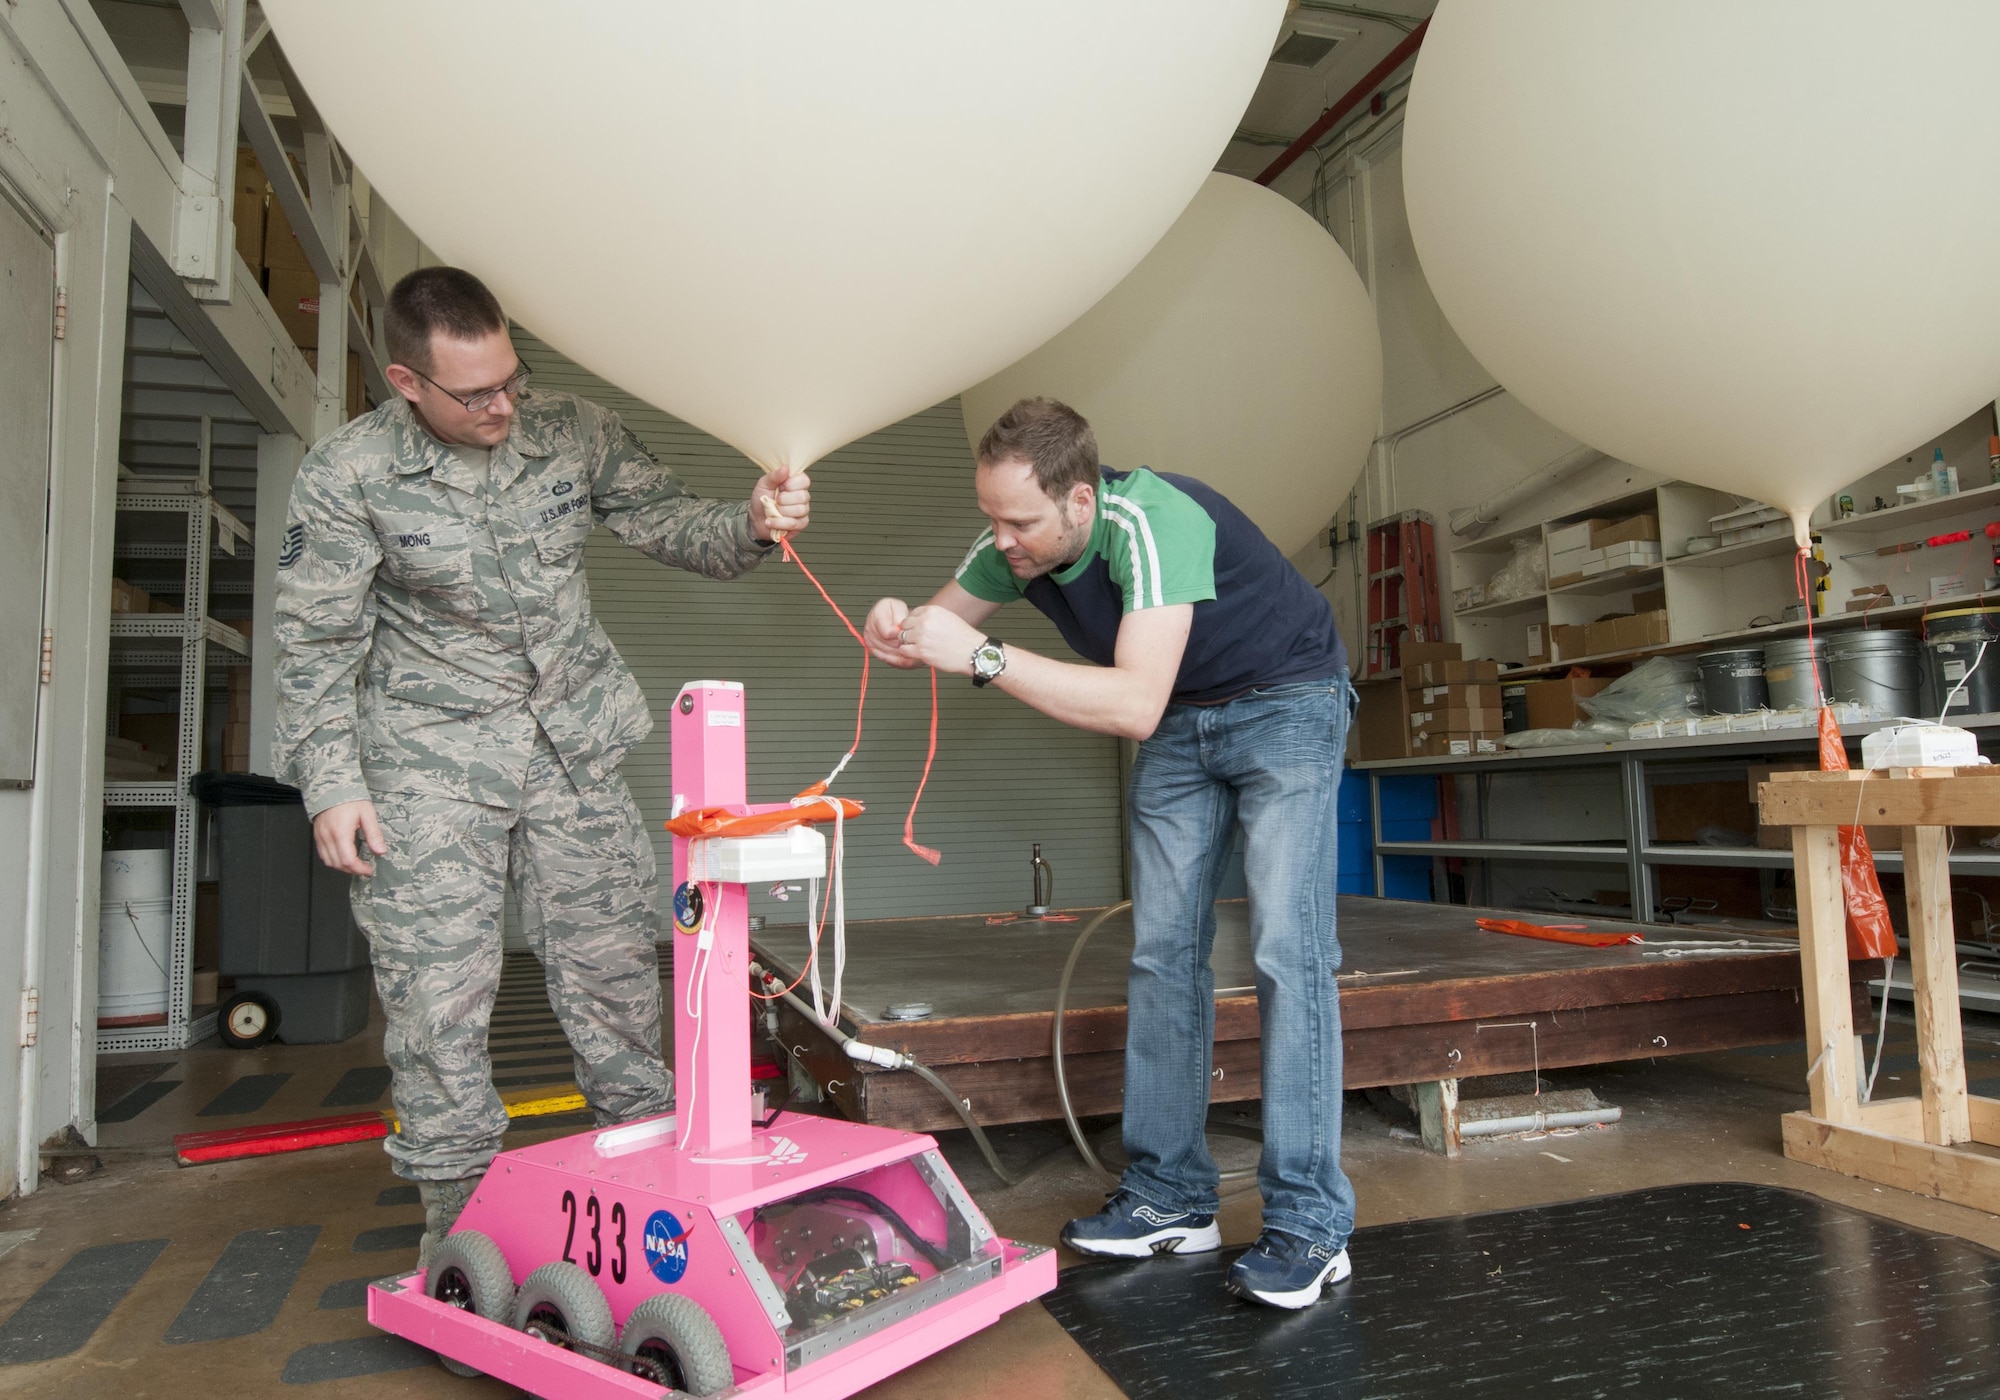 Tech Sgt. Matthew Mong, a 45th Weather Squadron range weather forecaster, and Mike Boyer, a meteorological data specialist, attach a weather balloon to a “weatherbot” inside the weather balloon facility on Cape Canaveral Air Force Station, Fla., Feb. 24, 2016. The remote-controlled robot releases balloons when lightning is present so forecasters can stay safely indoors. Data from the balloons, particularly wind speed and direction, help Airmen and mission partners decide either to launch or postpone a space mission. (U.S. Air Force photo/Sean Kimmons)